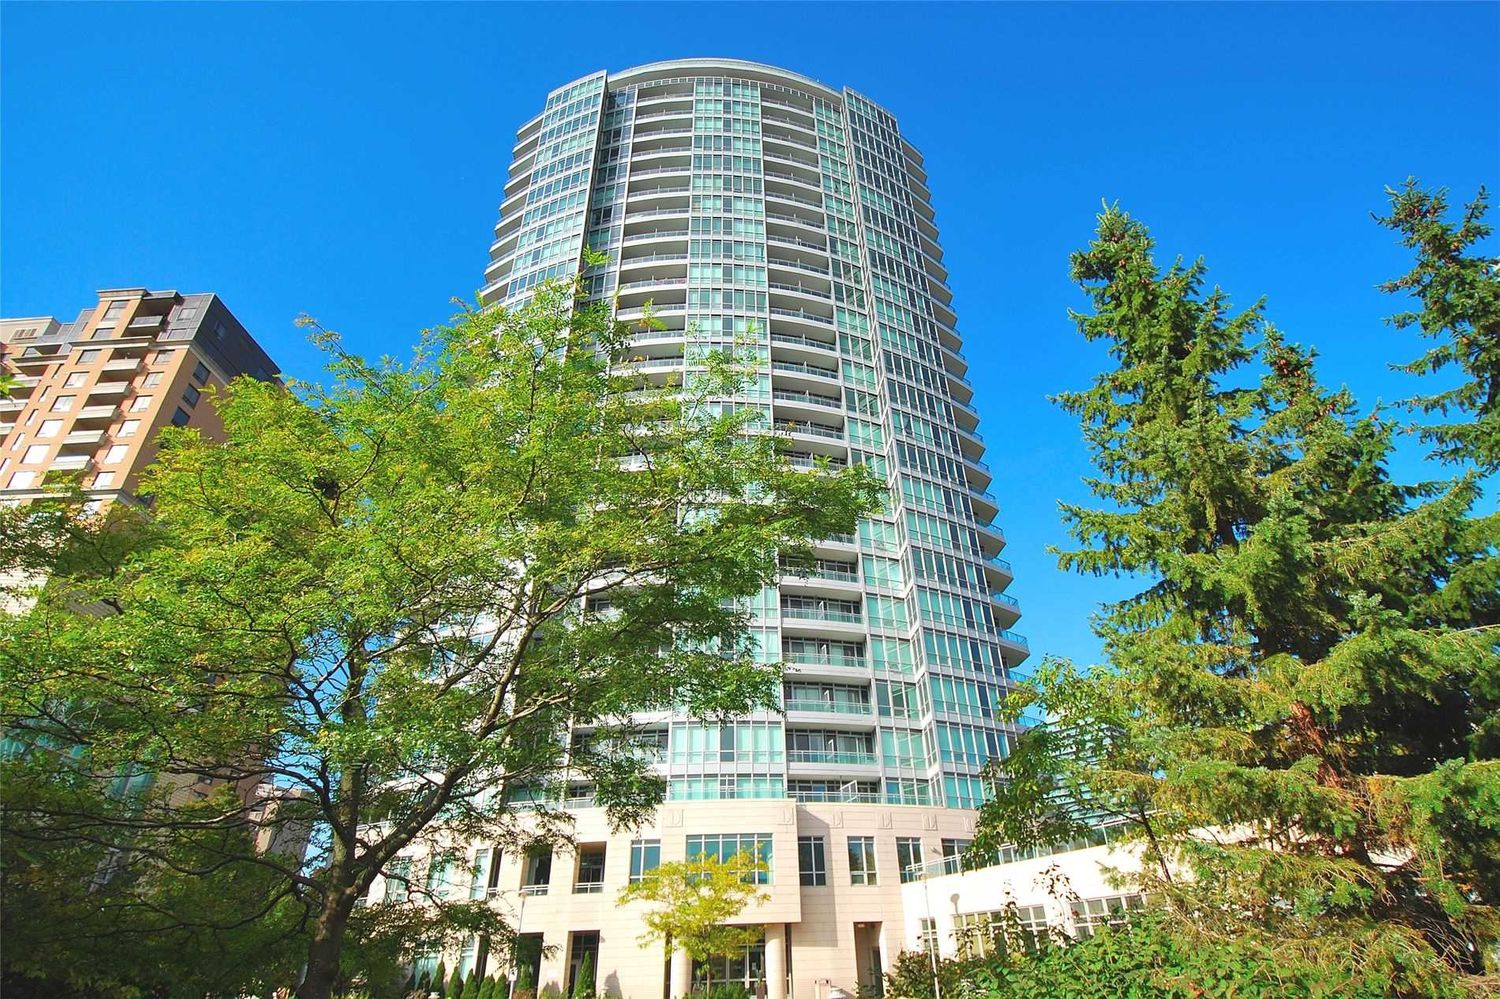 60 Byng Avenue. The Monet Condos is located in  North York, Toronto - image #3 of 3